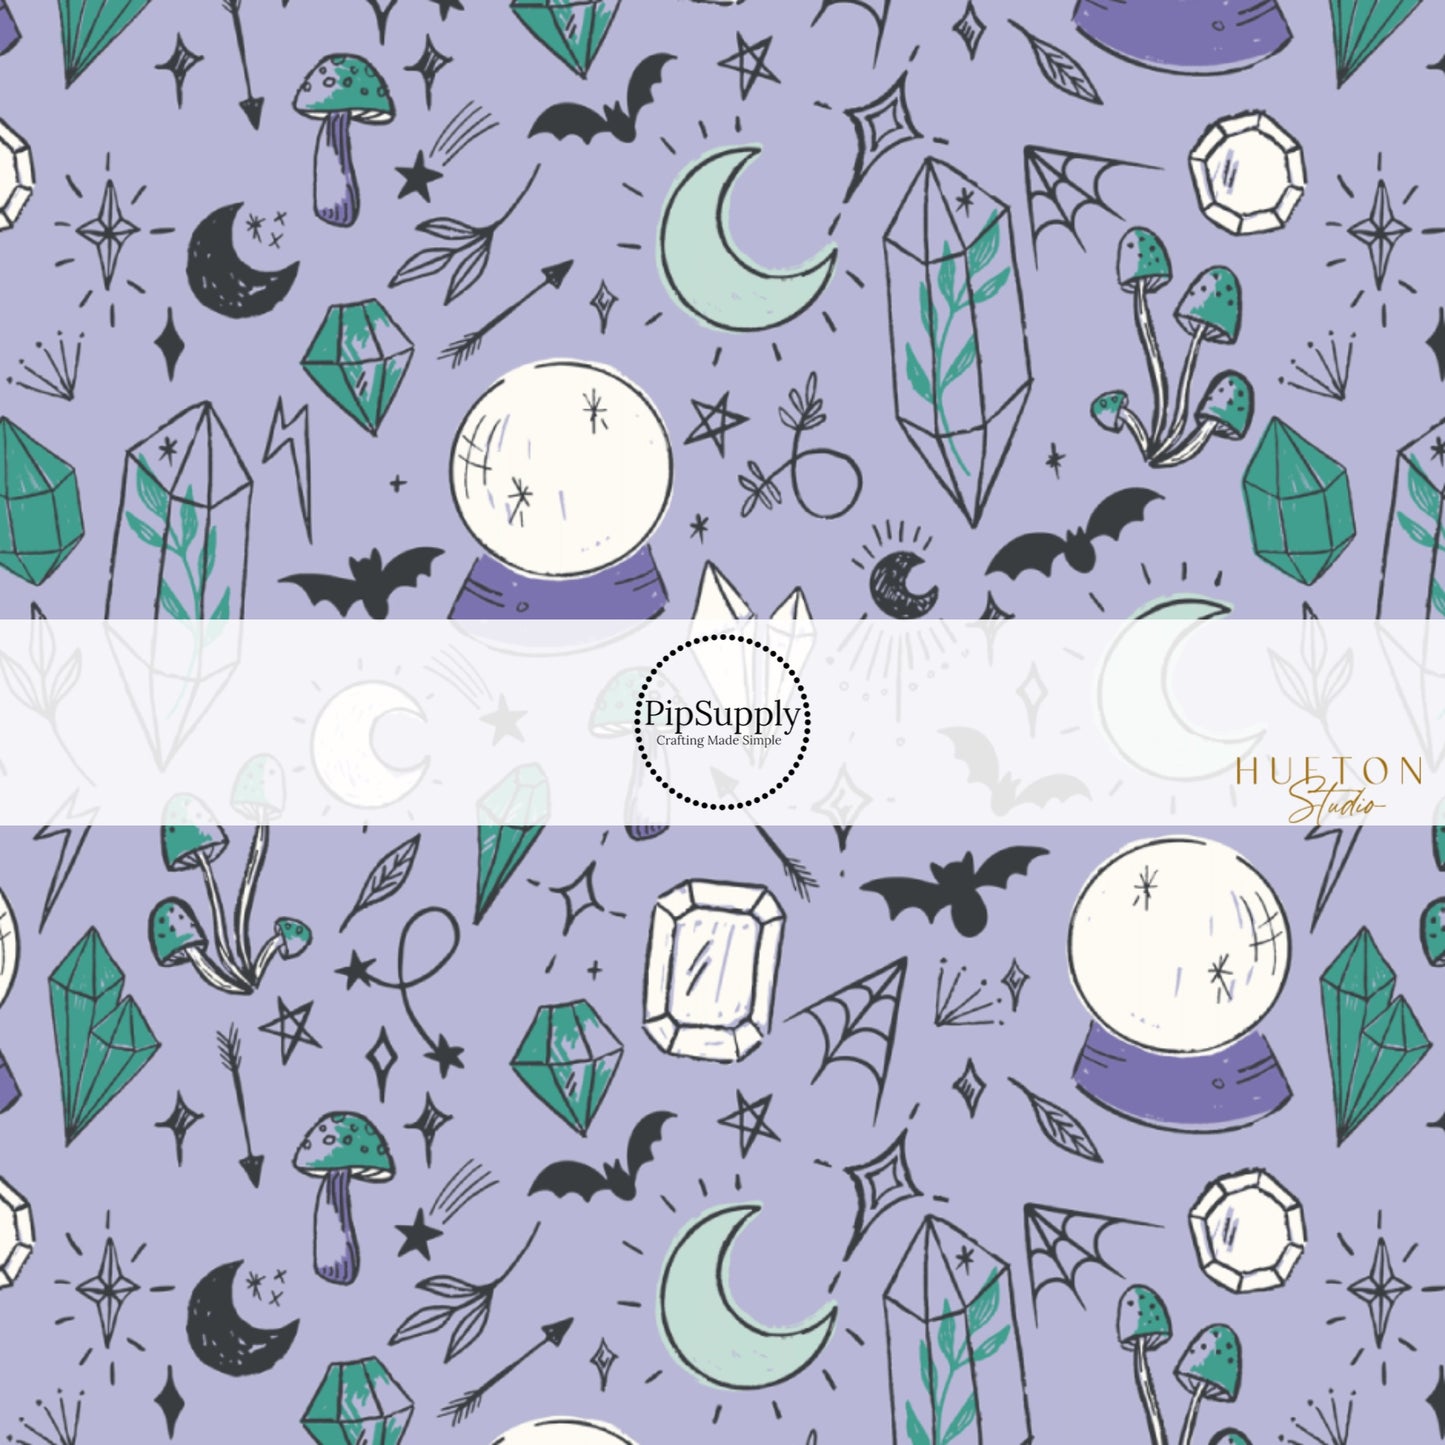 These Halloween themed light purple fabric by the yard features crystal balls, crystals, bats, stars and moons on purple. This fun themed fabric can be used for all your sewing and crafting needs! 